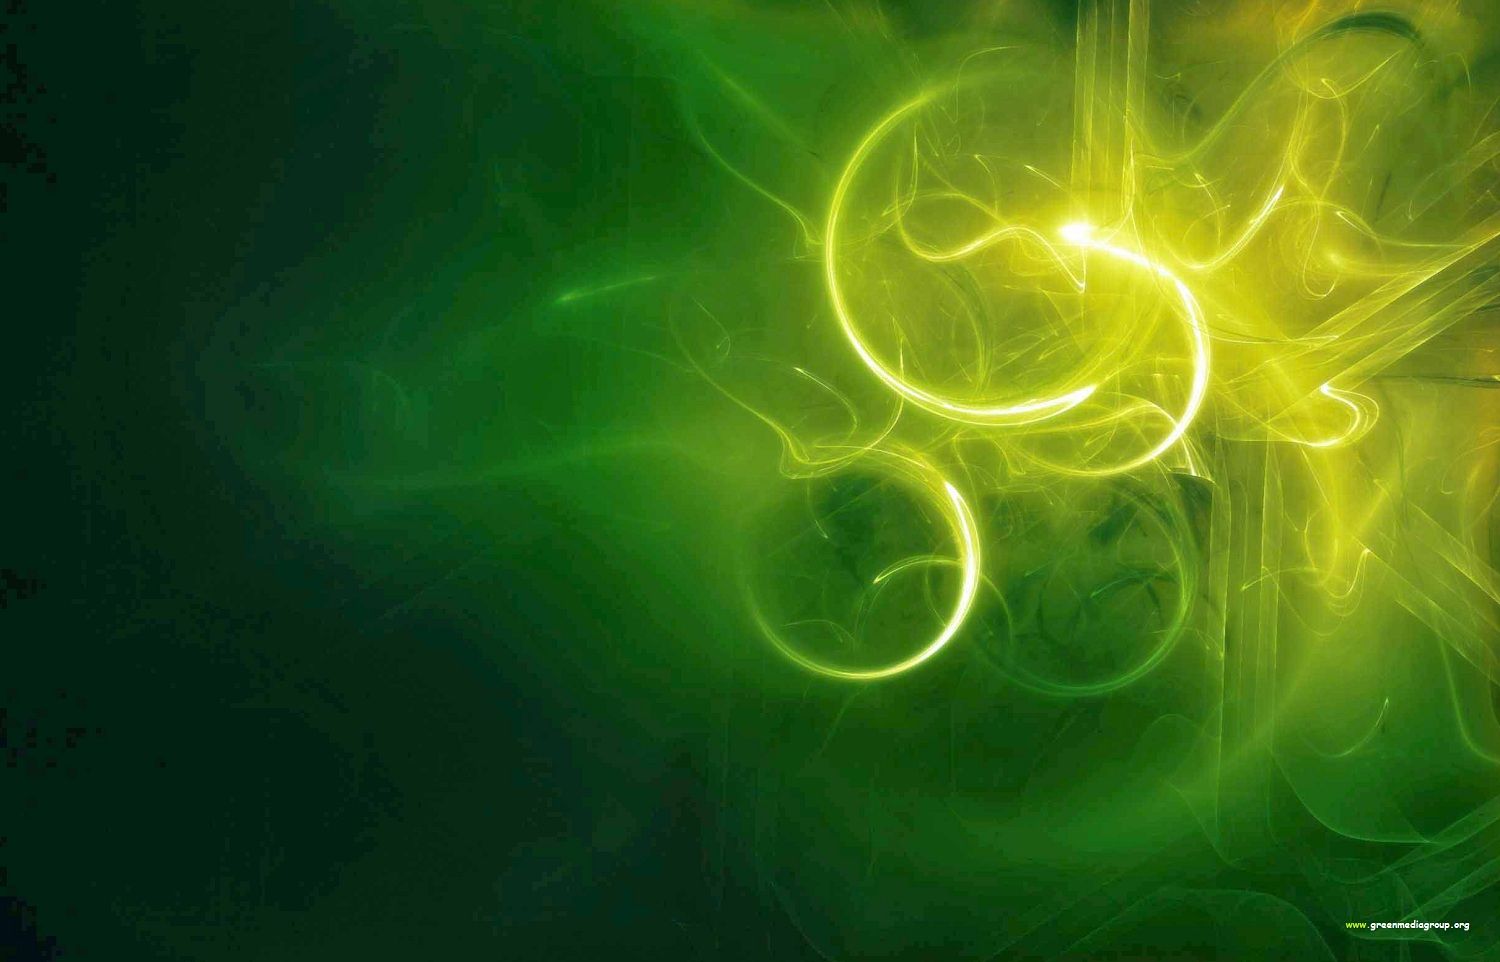 Free download EPIC GREEN AND GOLD BACKGROUNDS [1500x962] for your Desktop, Mobile & Tablet. Explore Gold and Green Wallpaper. Green and Black Wallpaper, Green Wallpaper for Walls, Gold and Black Wallpaper